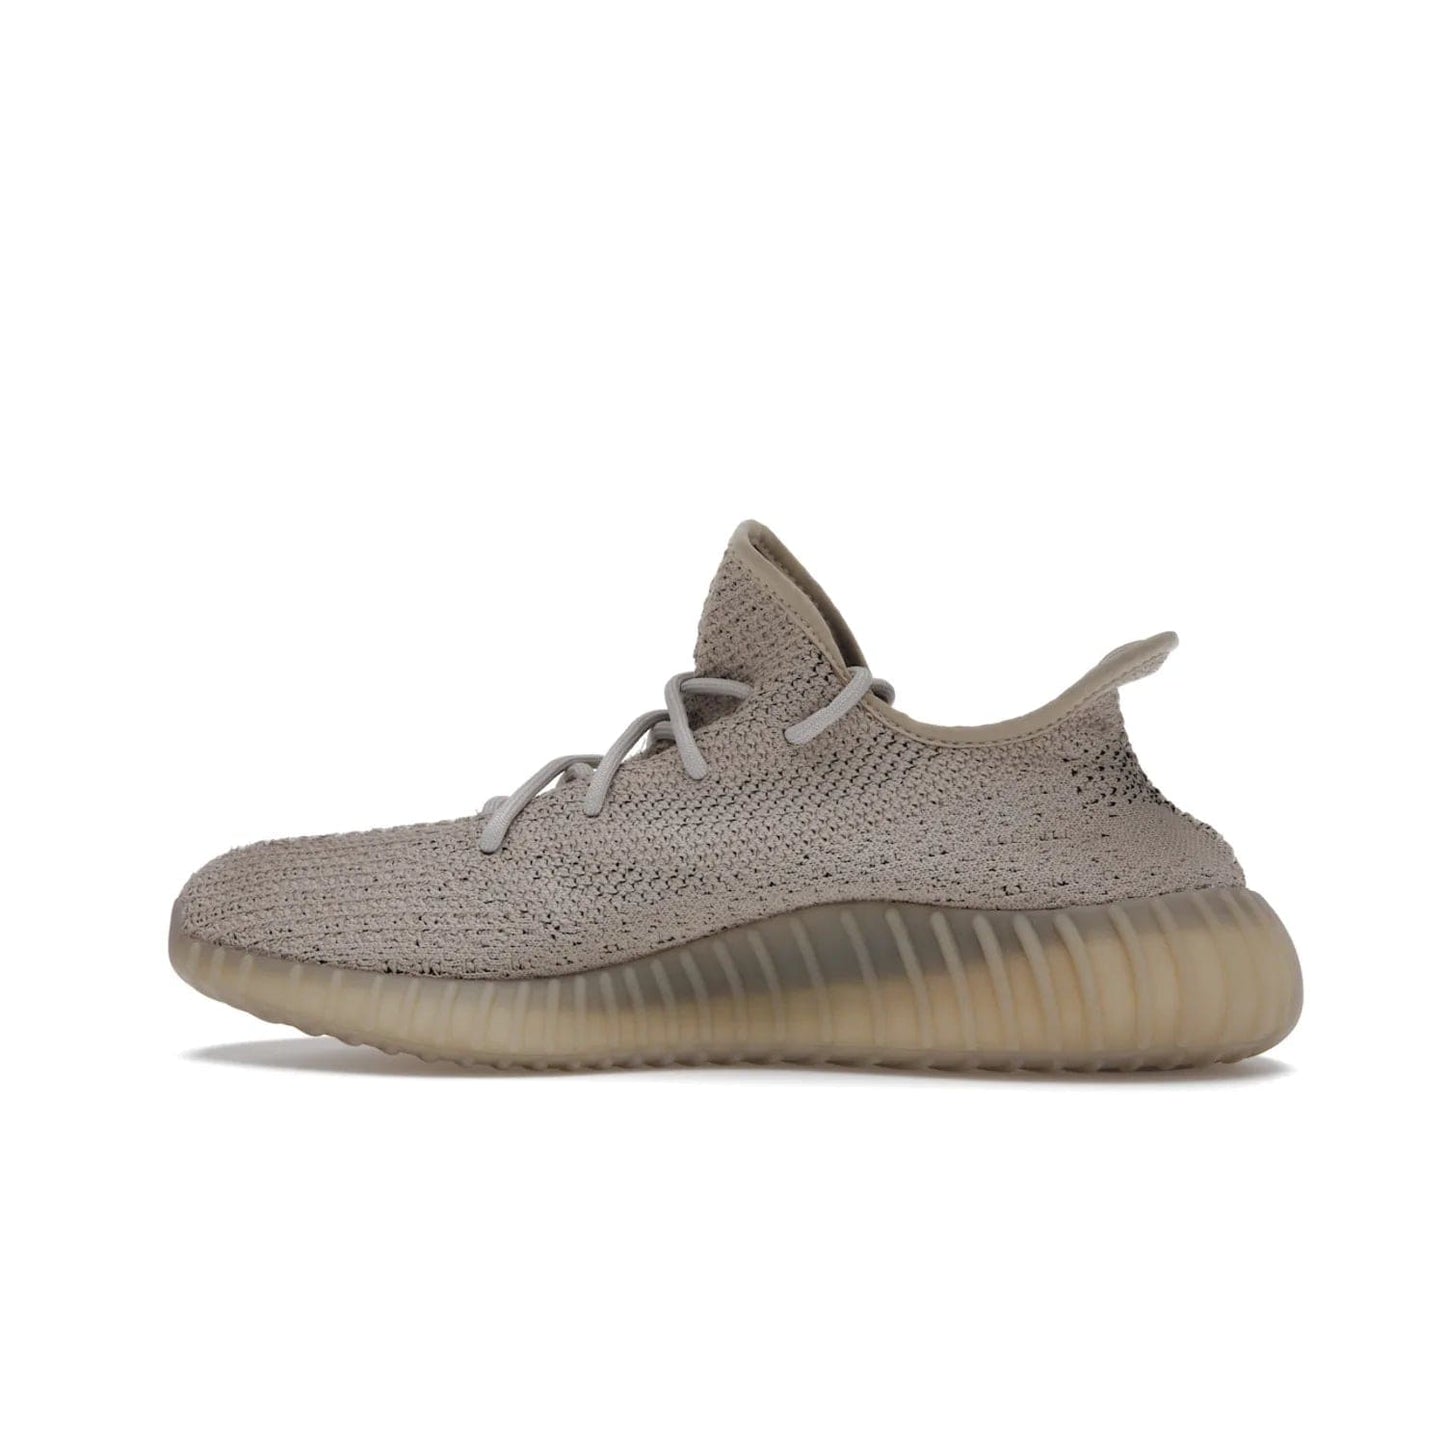 adidas Yeezy Boost 350 V2 Slate - Image 20 - Only at www.BallersClubKickz.com - Adidas Yeezy Boost 350 V2 Slate Core Black Slate featuring Primeknit upper, Boost midsole and semi-translucent TPU cage. Launched on 3/9/2022, retailed at $230.